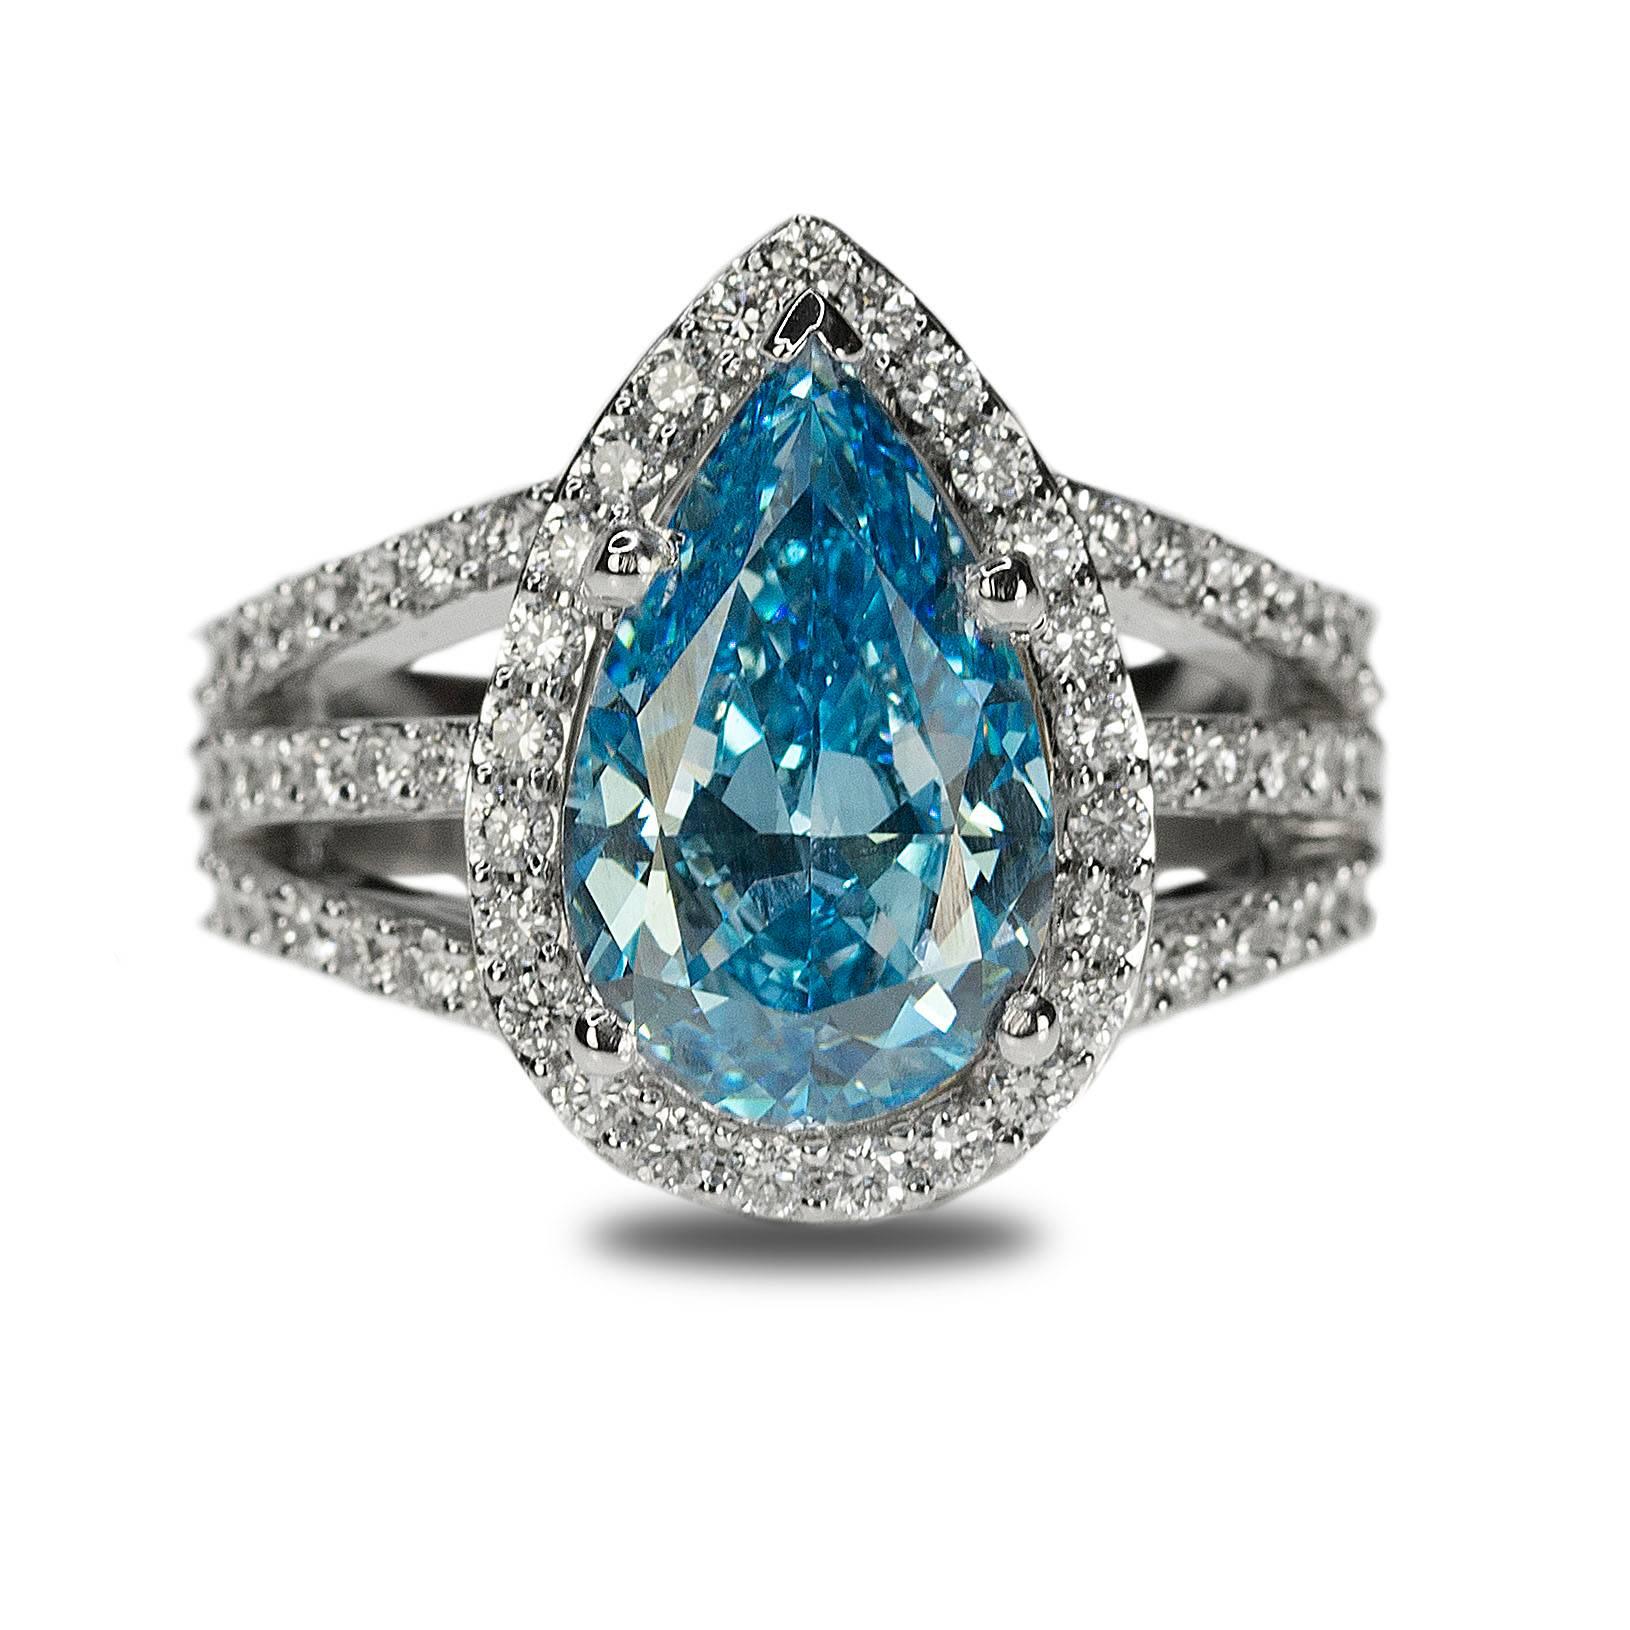 18k Ring with one GIA cetified HPHT Fancy Vivid Blue, VVS1 clarity diamonds weighing 4.02 carats and 0.96 carats of fine white natural diamonds.